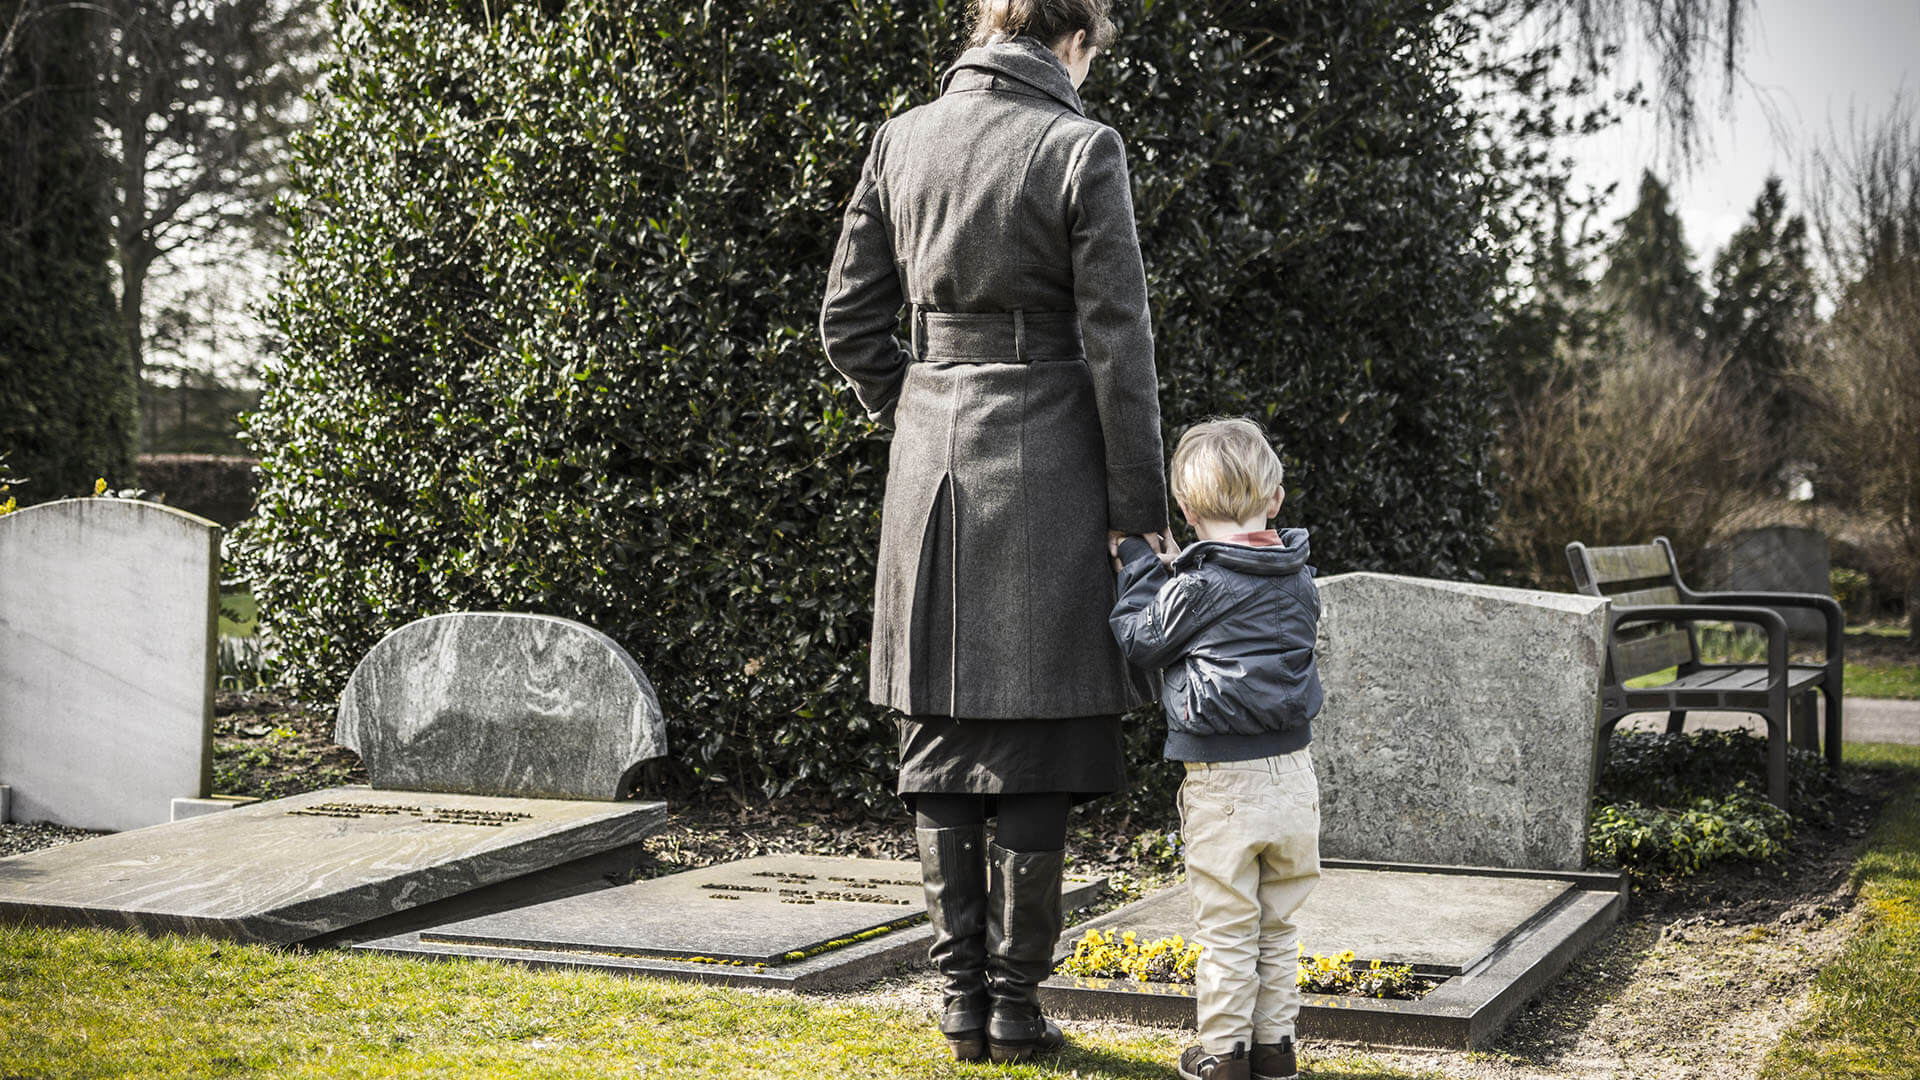 A mother and son in a cemetery viewing the grave of man who suffered a wrongful death